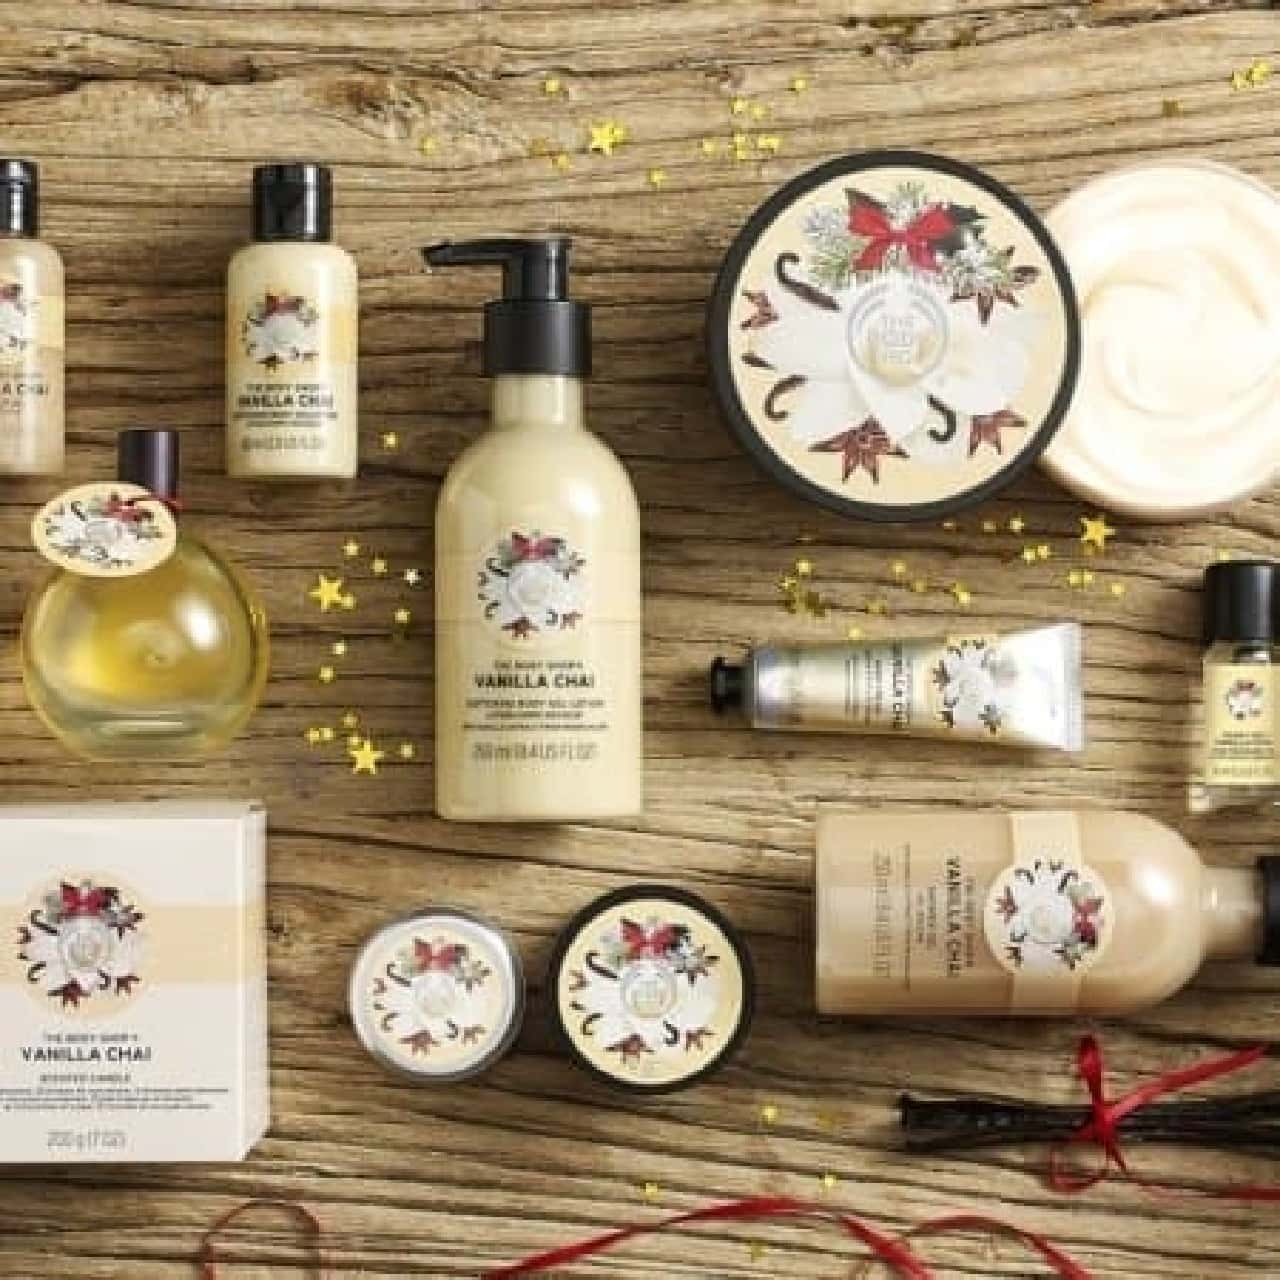 The Body Shop Christmas Limited Collection